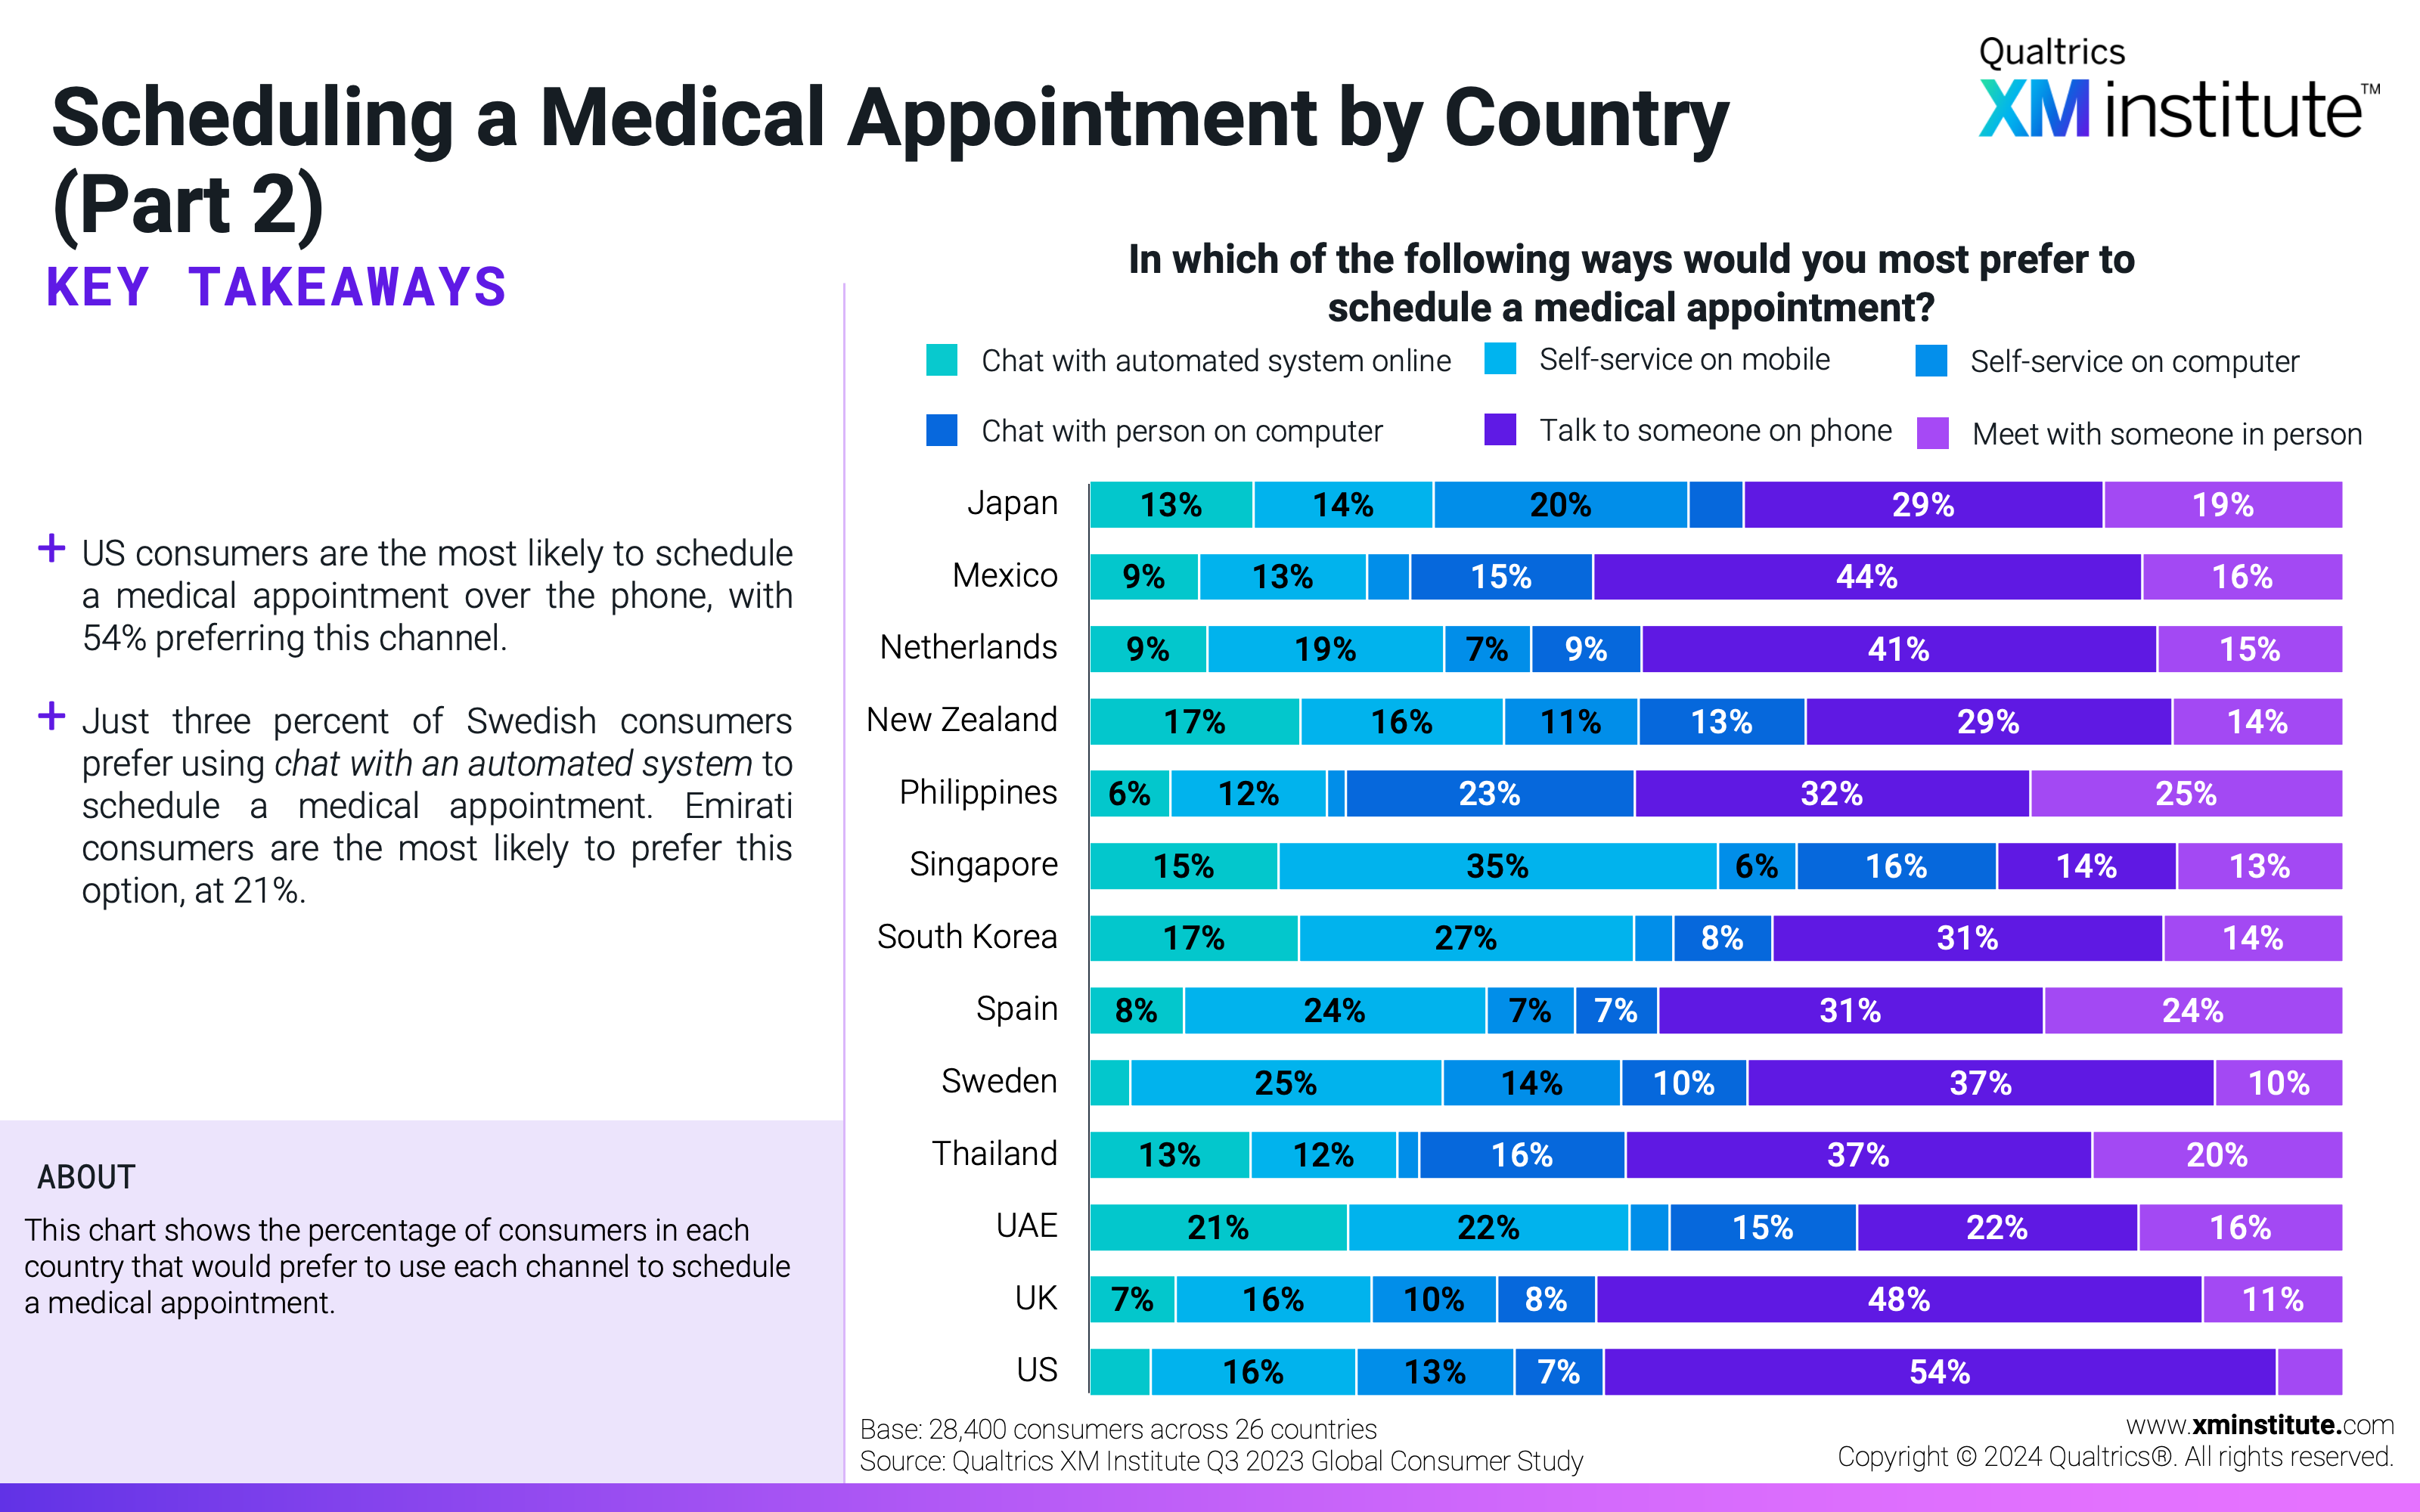 This chart shows the percentage of consumers in each country that would prefer to use each channel to schedule a medical appointment. 